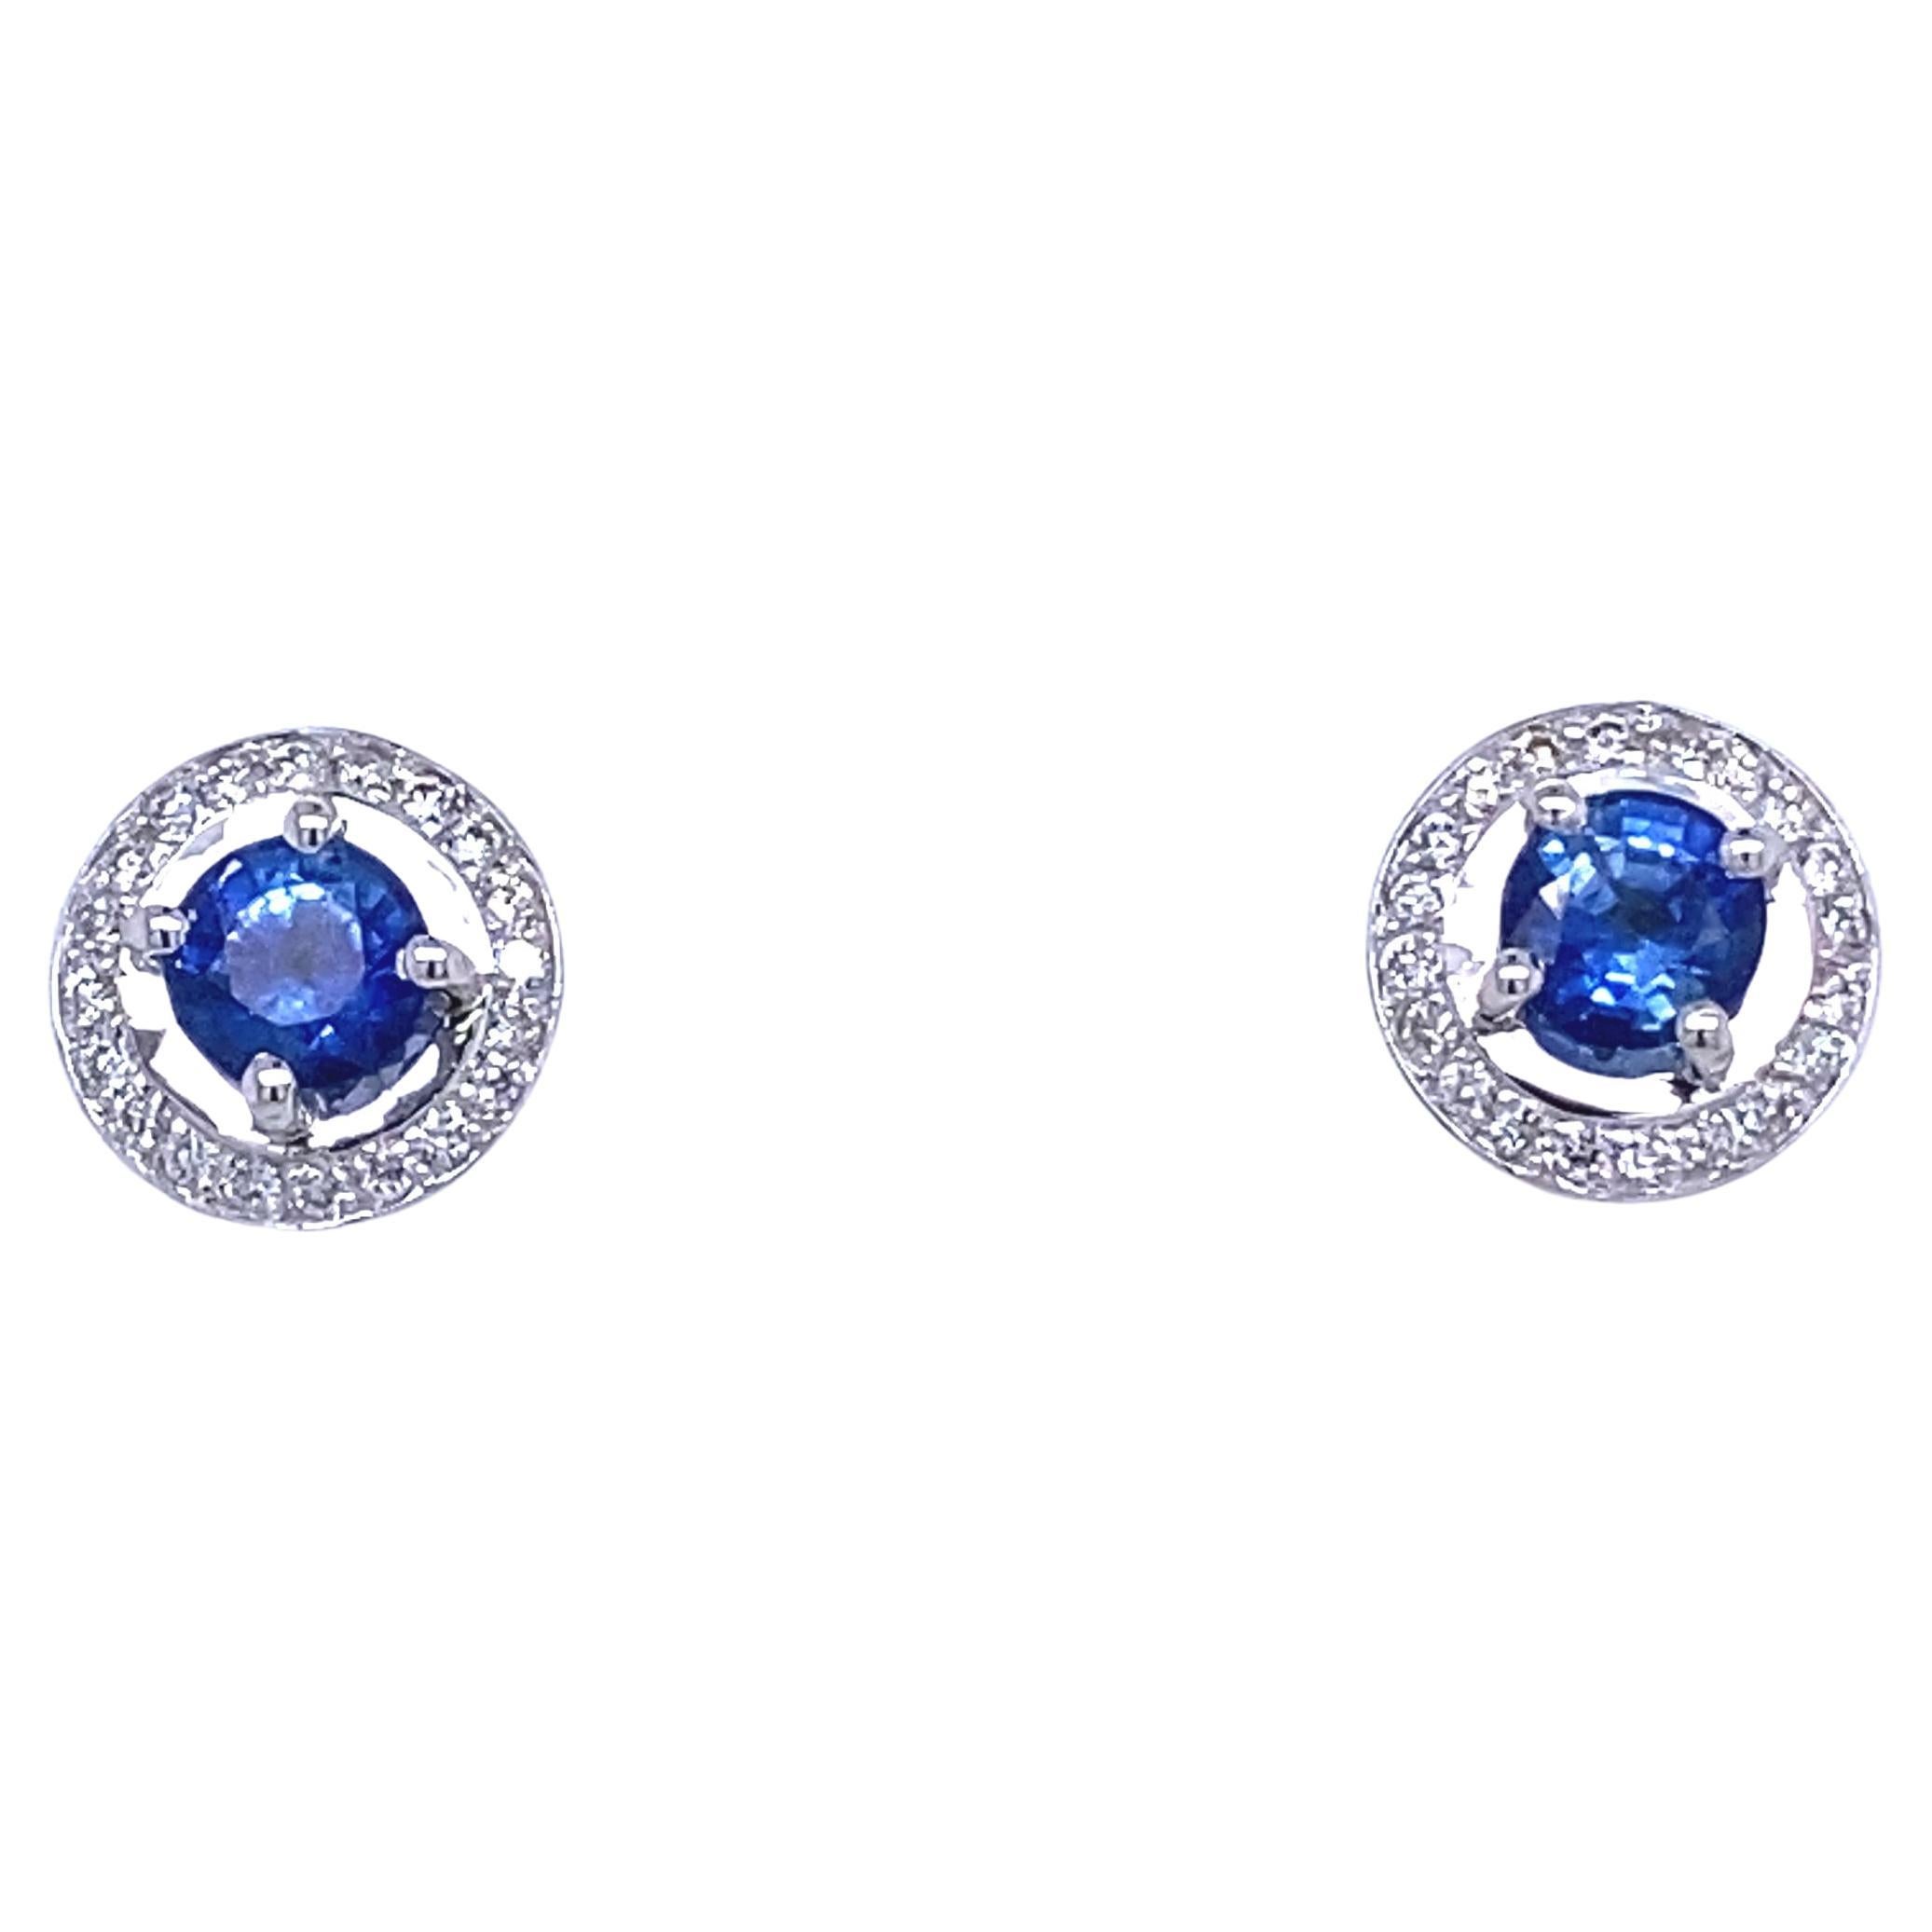 White Gold Earrings with Ceylon Sapphire and Diamonds